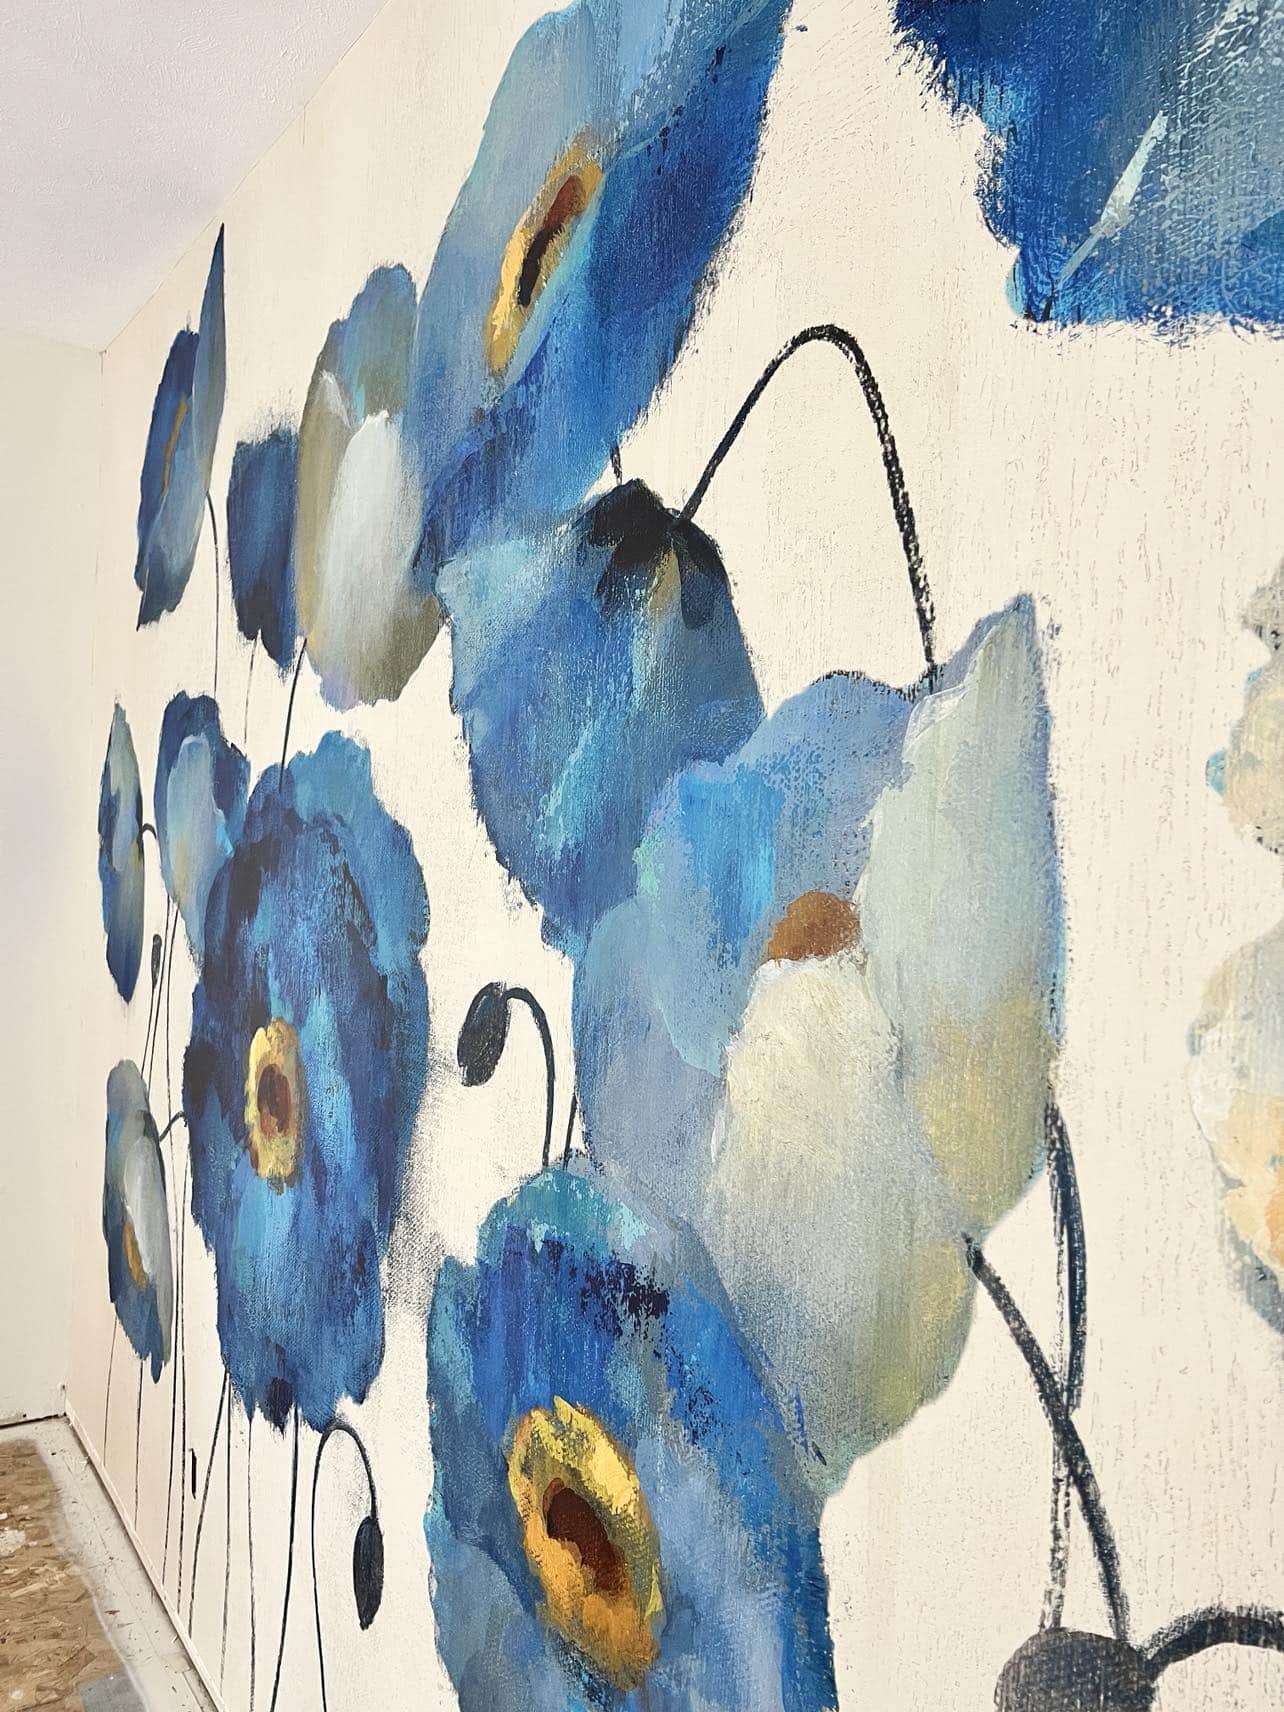 How to Hang a Wallpaper Mural: A Step-by-Step Guide